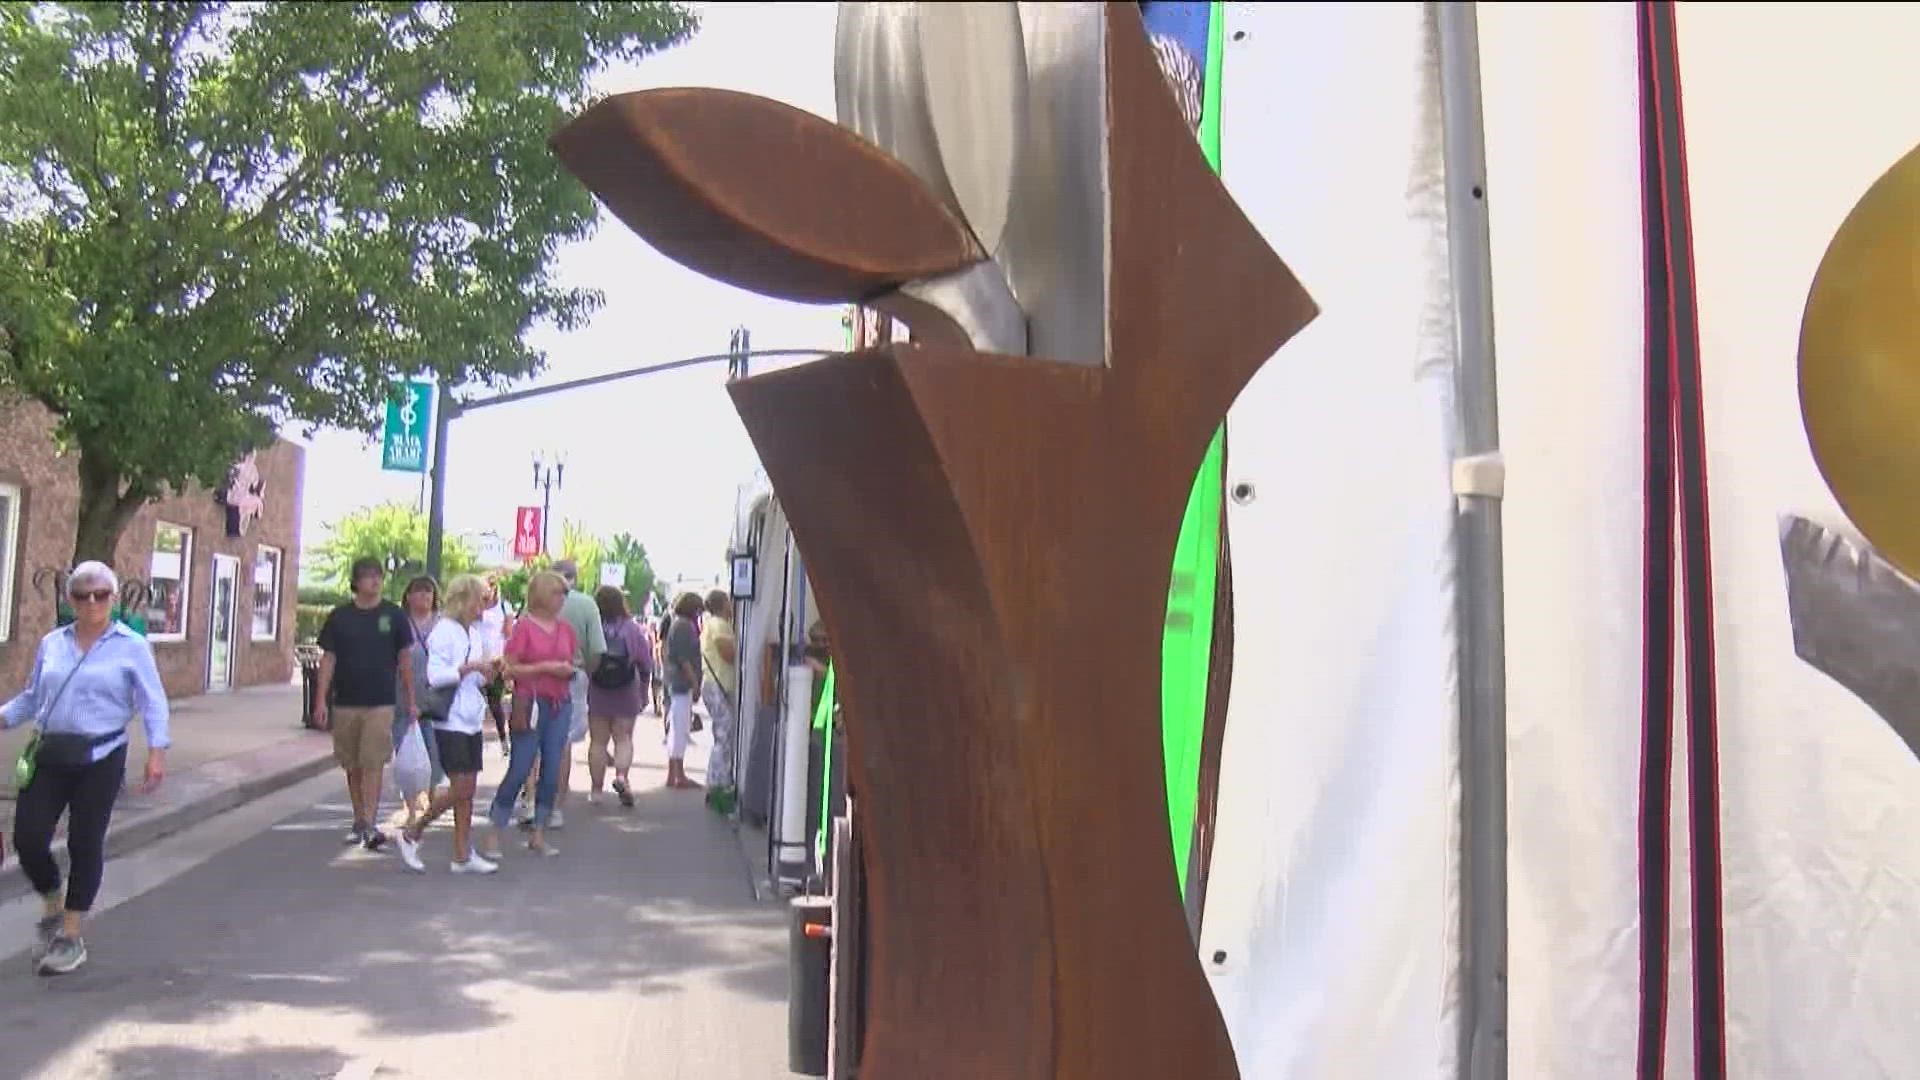 The festival in Wood County hosts thousands of different artists and musicians, both local and from around the world, to showcase their art that thousands will see.